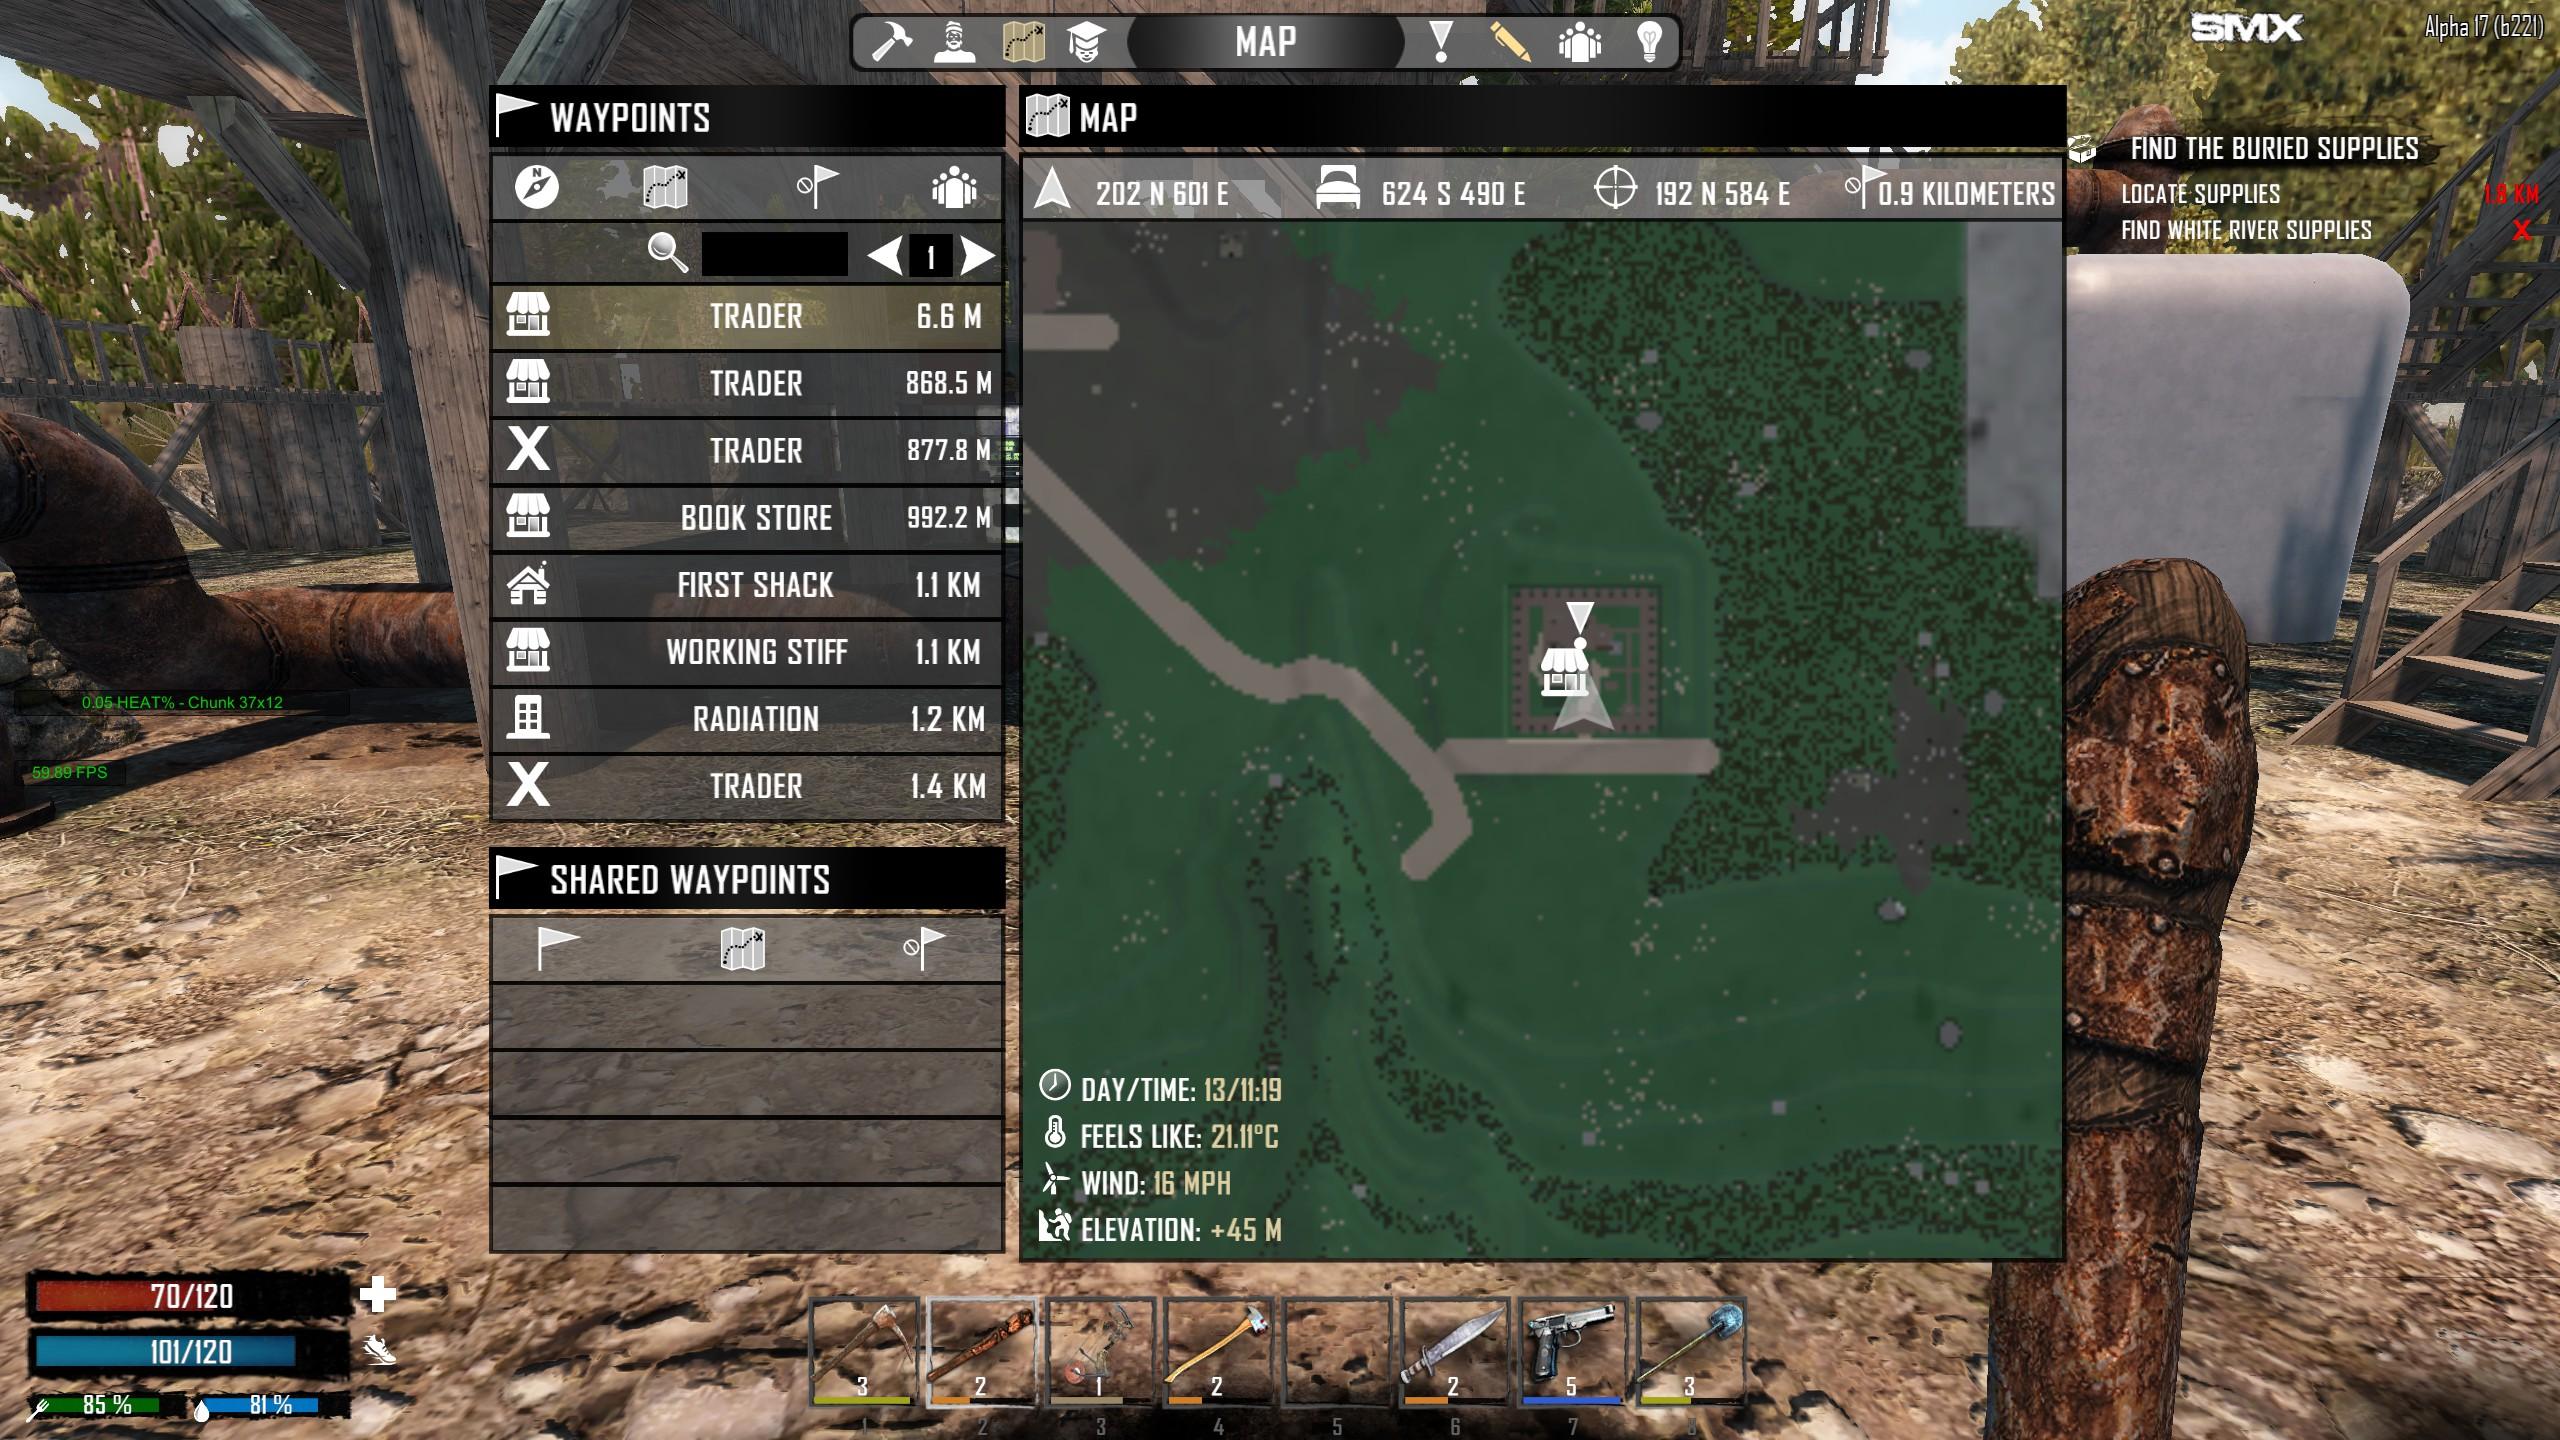 7 days to die trader locations xbox one